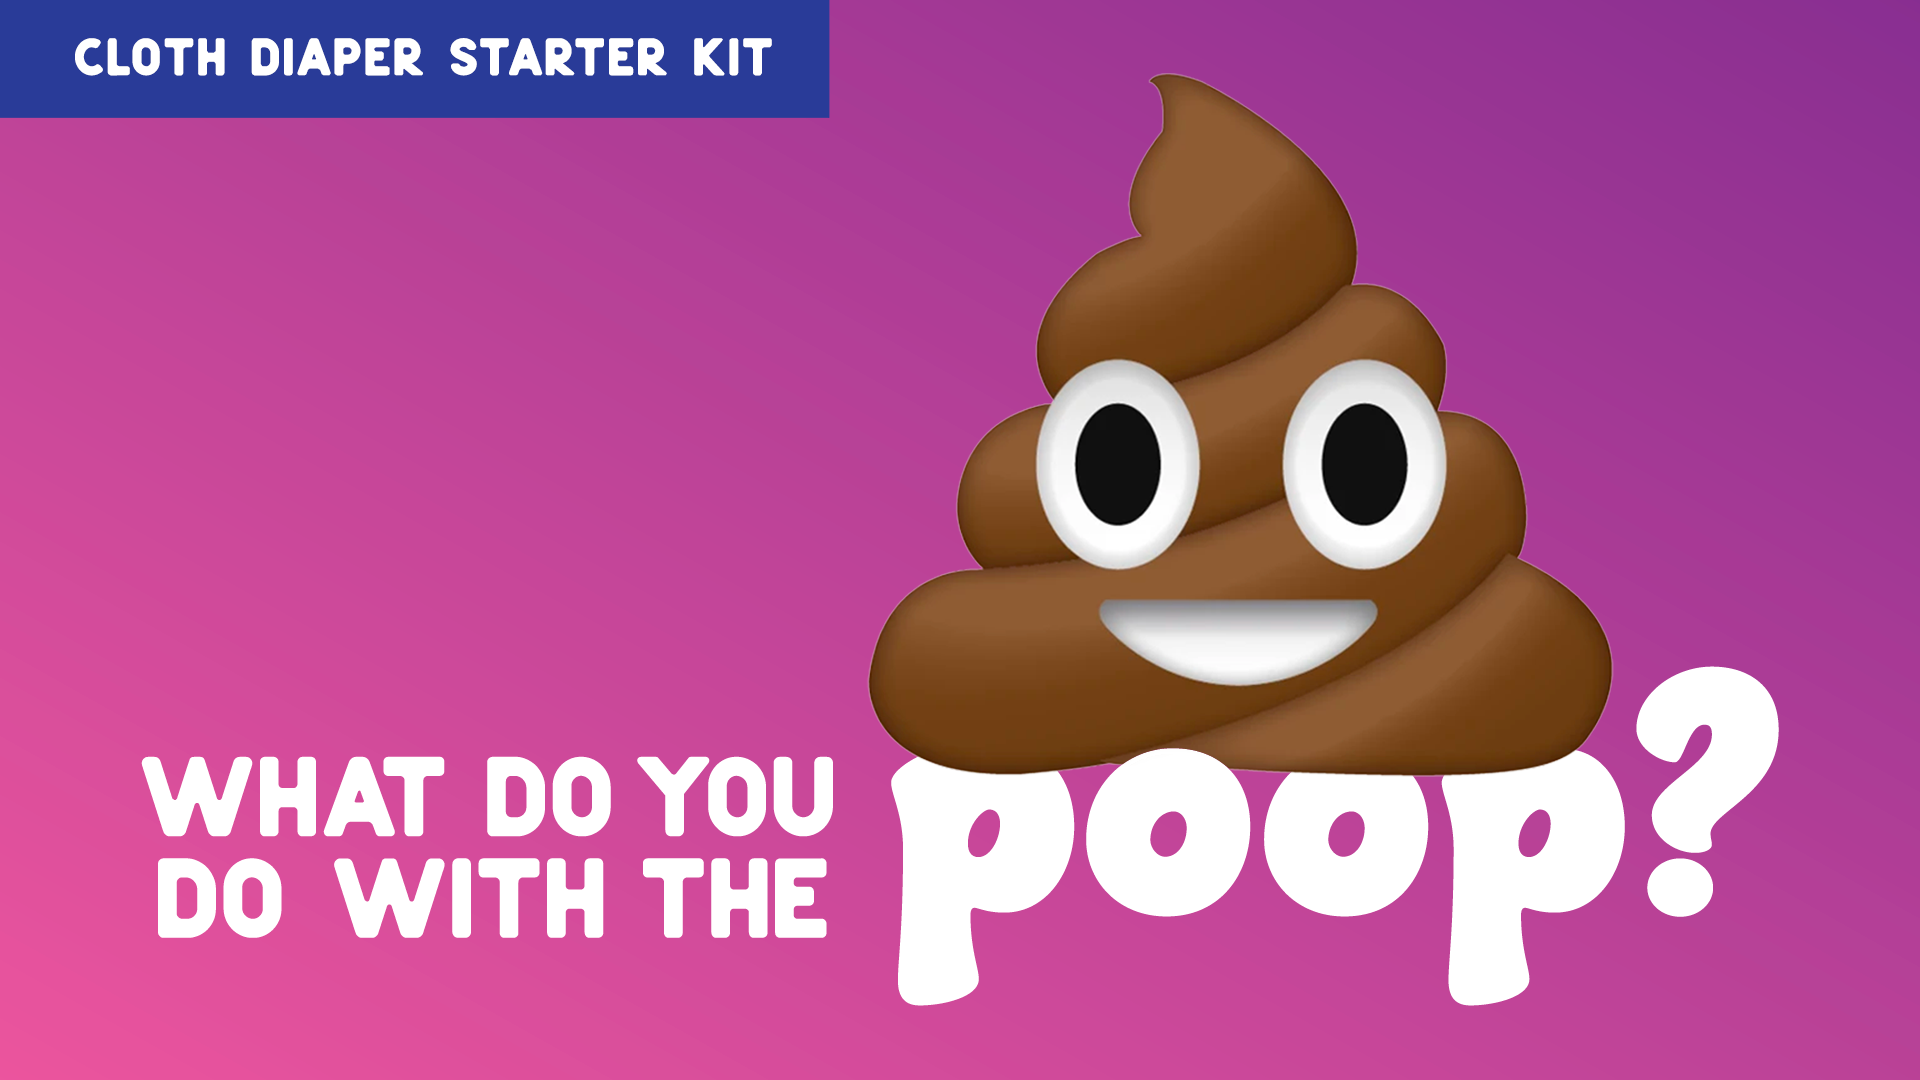 Cloth Diaper Starter Kit: What do you do with the poop? - Kinder Cloth Diaper Co.